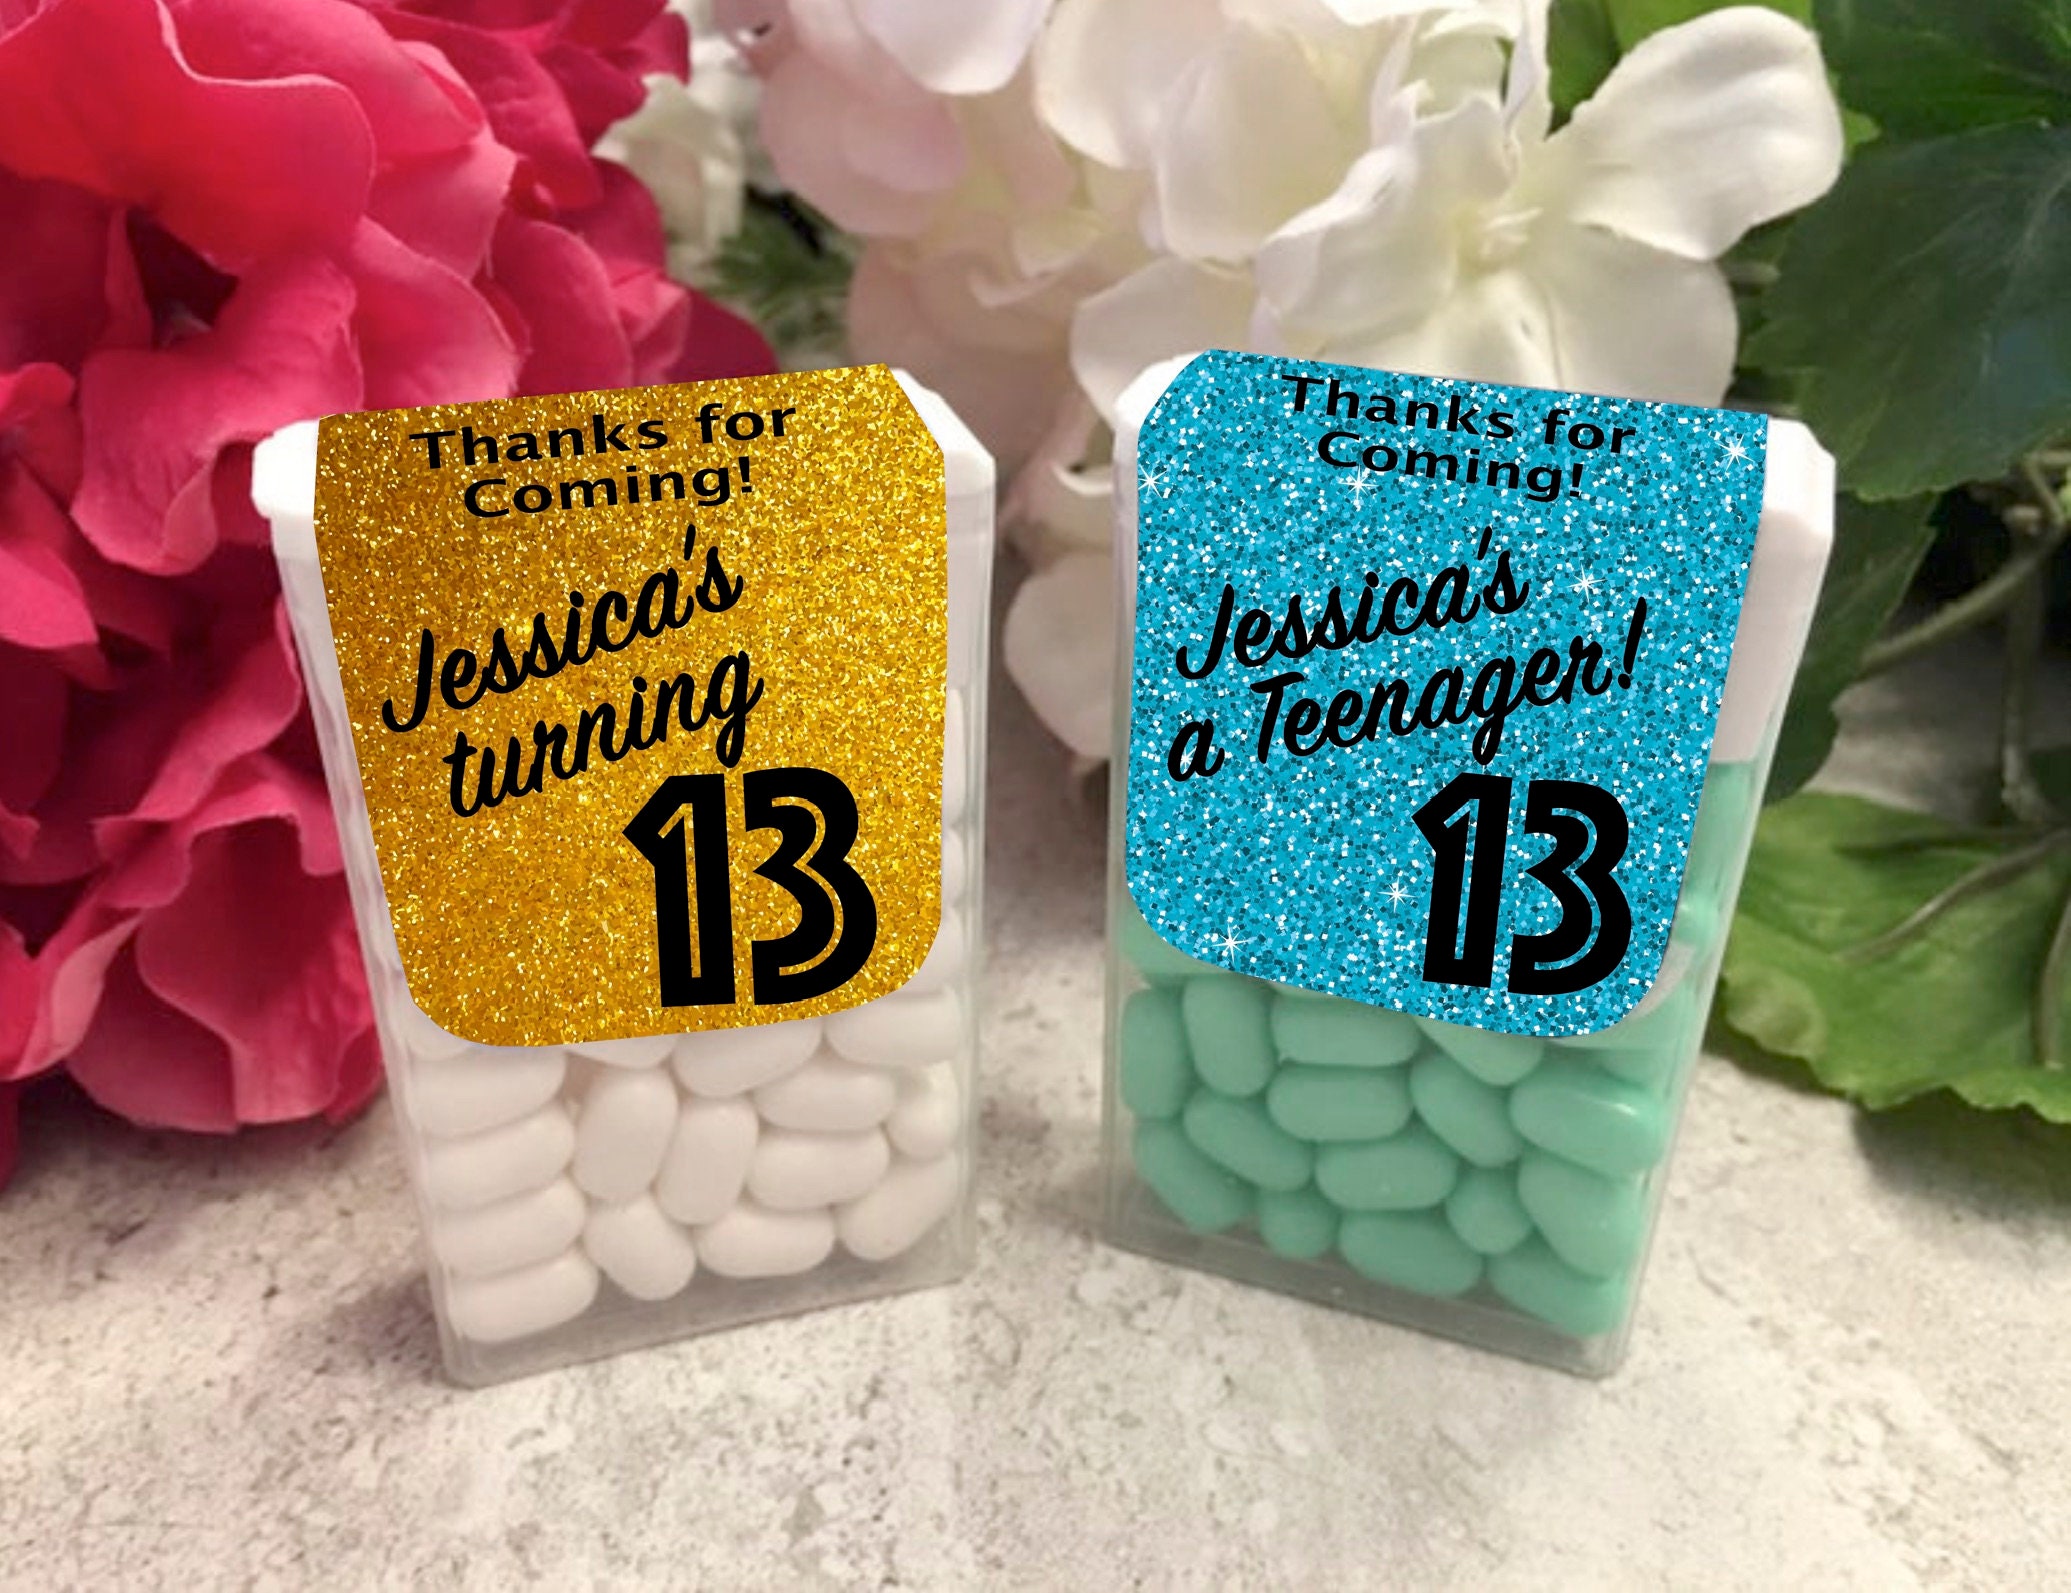 Ideas For Cool Teenage Party Favors They Will Love – Kids Birthday